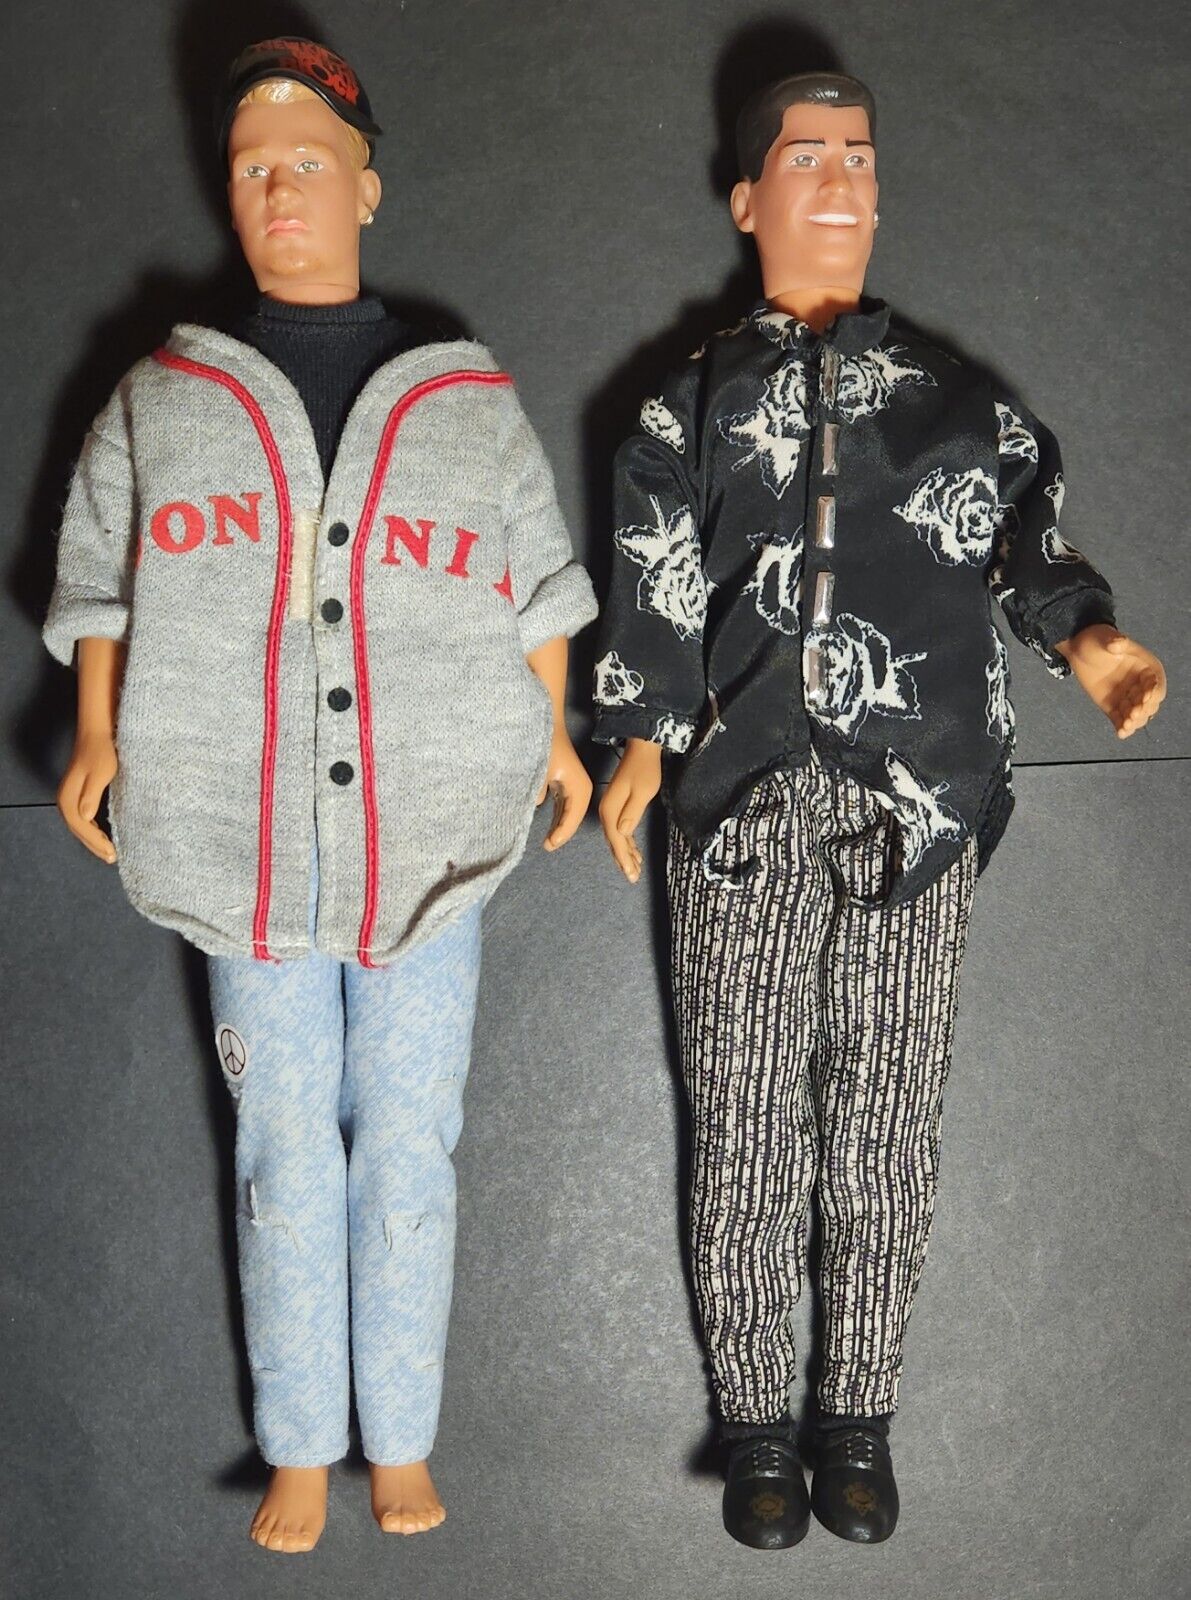 Vintage Hasbro 1990 New Kids on the Block NKOTB Dolls Figures - Donnie and Danny